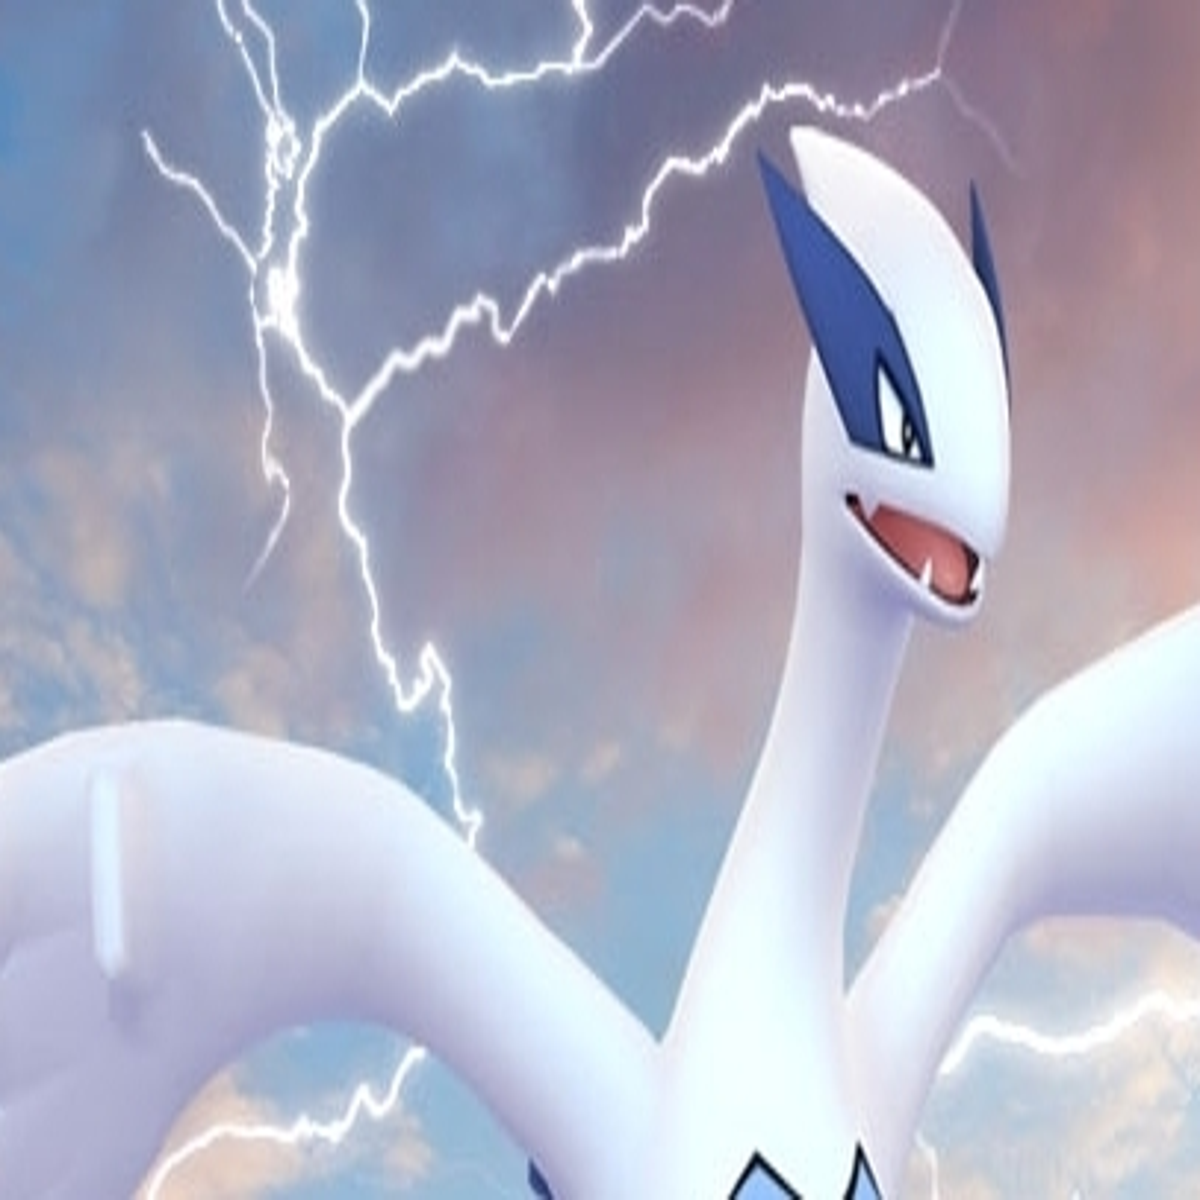 Pokémon Go Ho-oh best movesets, weakness, counters, and raid guide